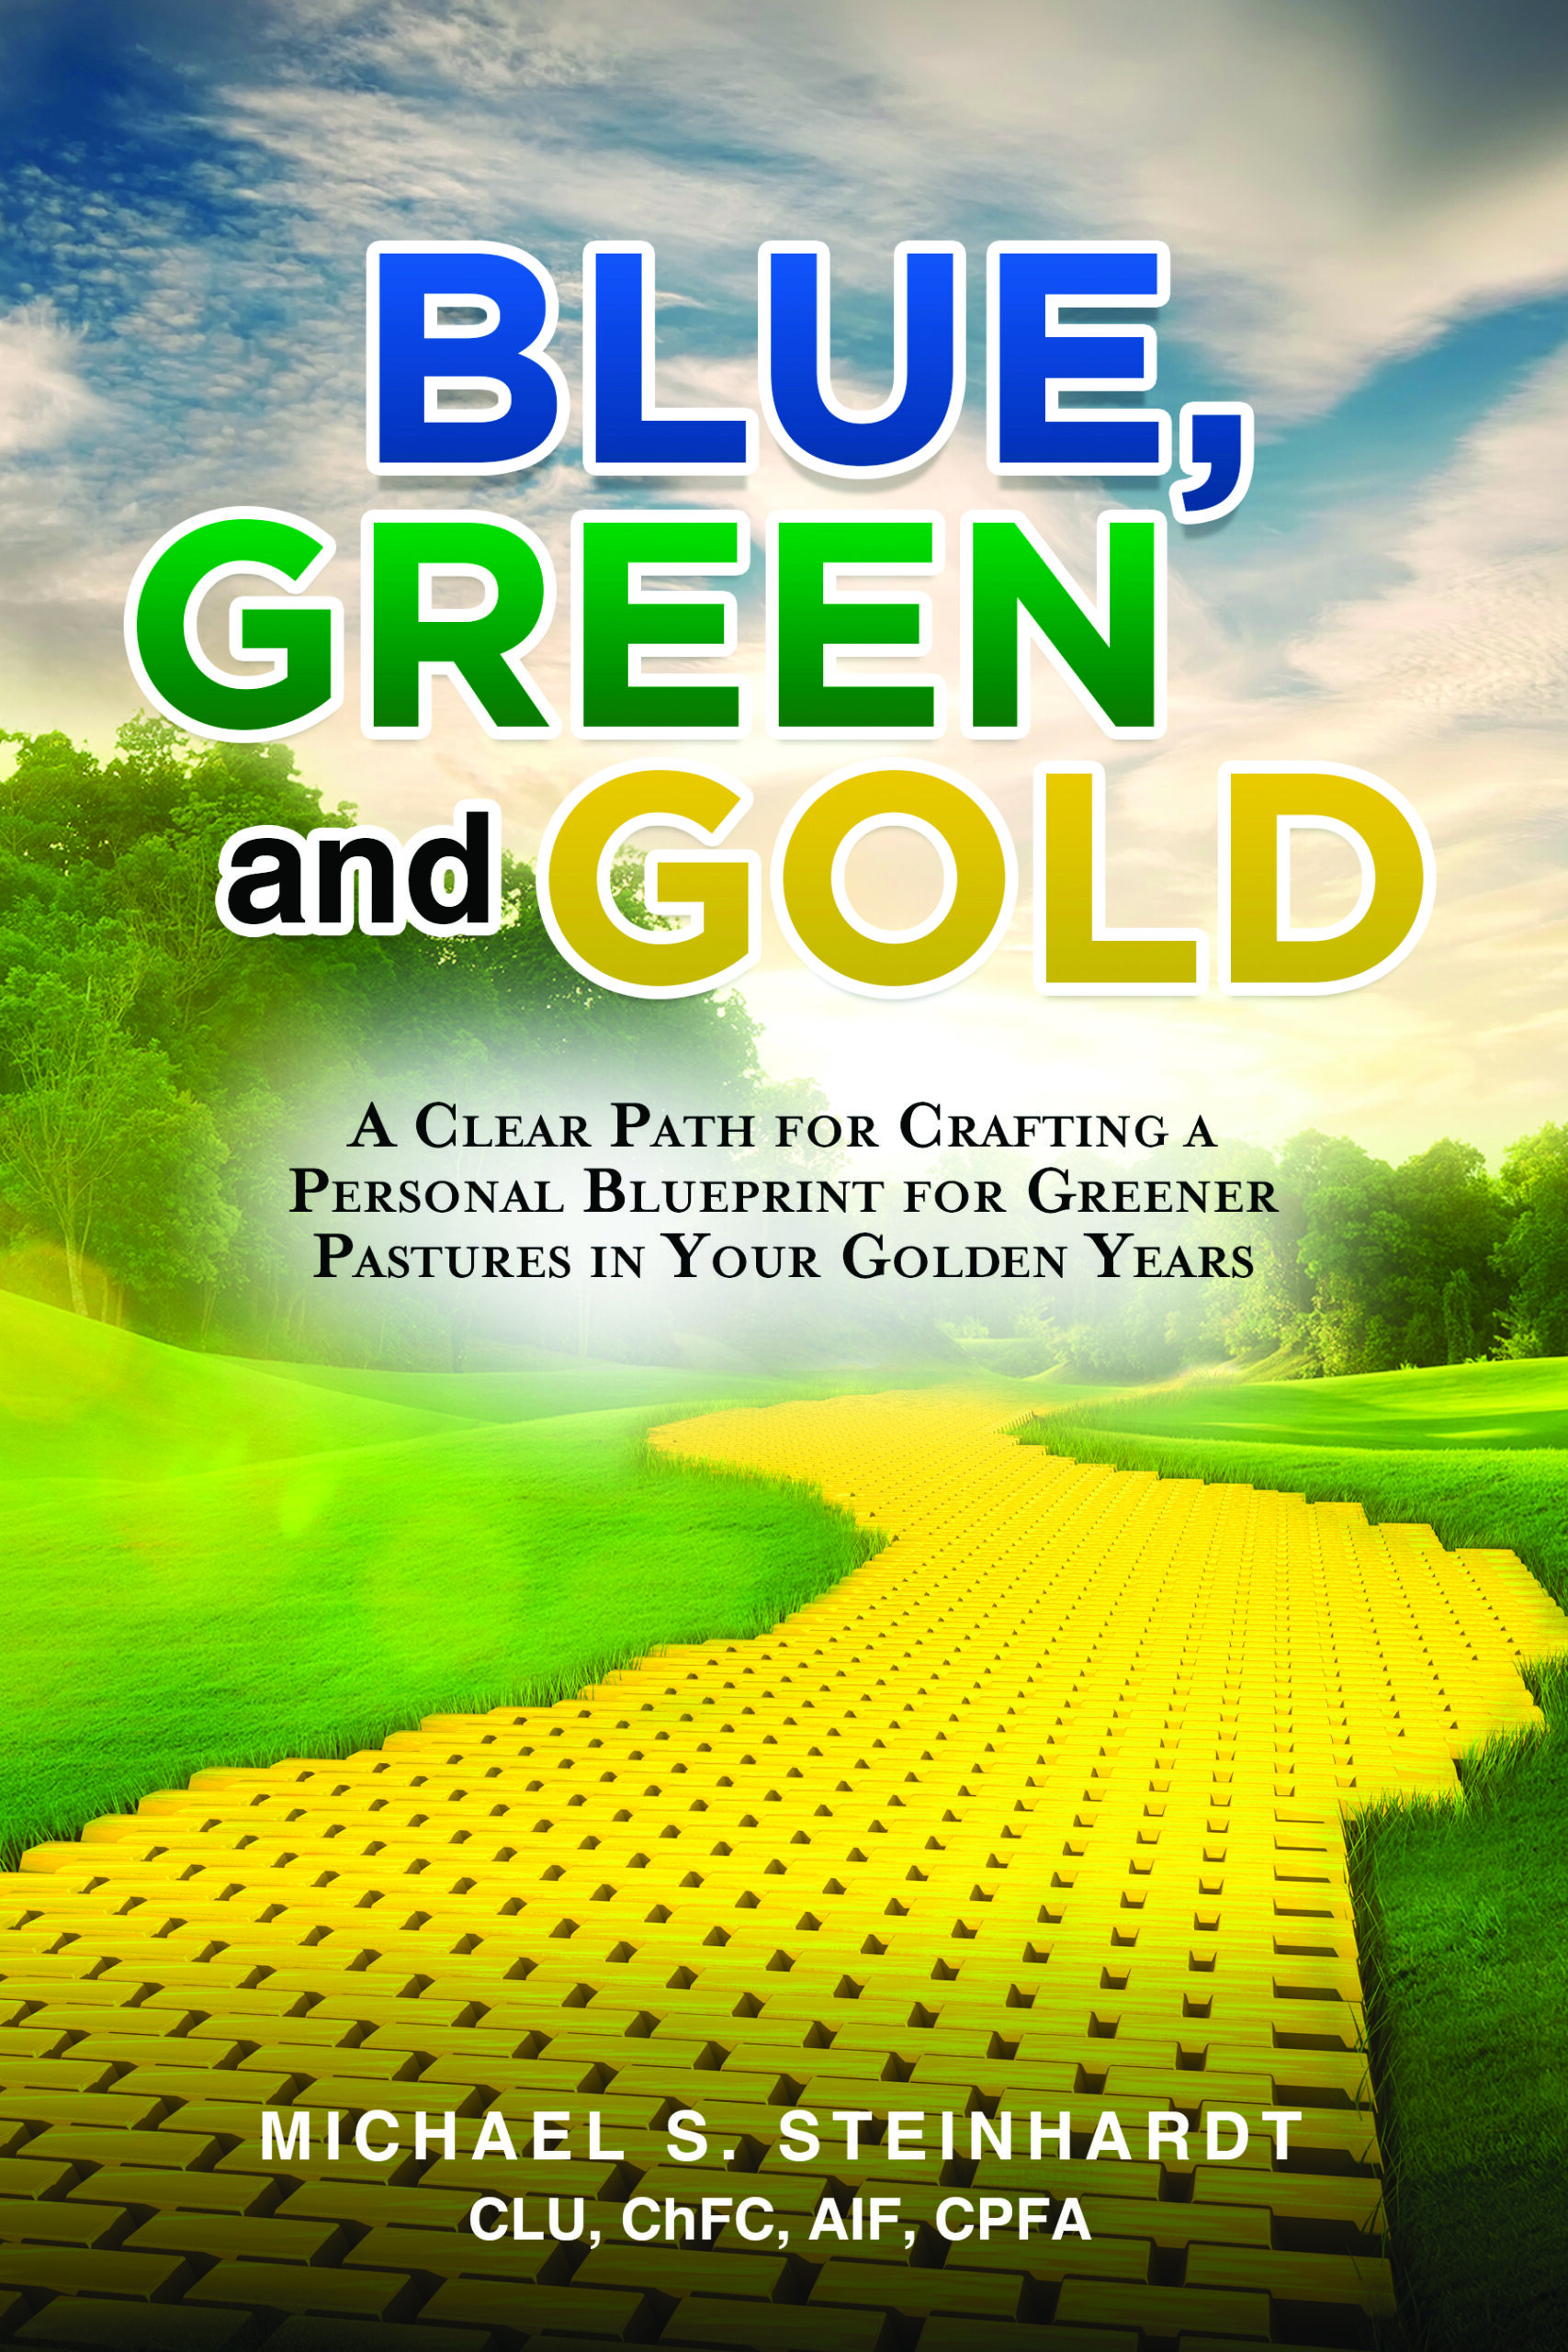 FREE: Blue, Green and Gold: A Clear Path for Crafting a Personal Blueprint for Greener Pastures in Your Golden Years by Michael S. Steinhardt